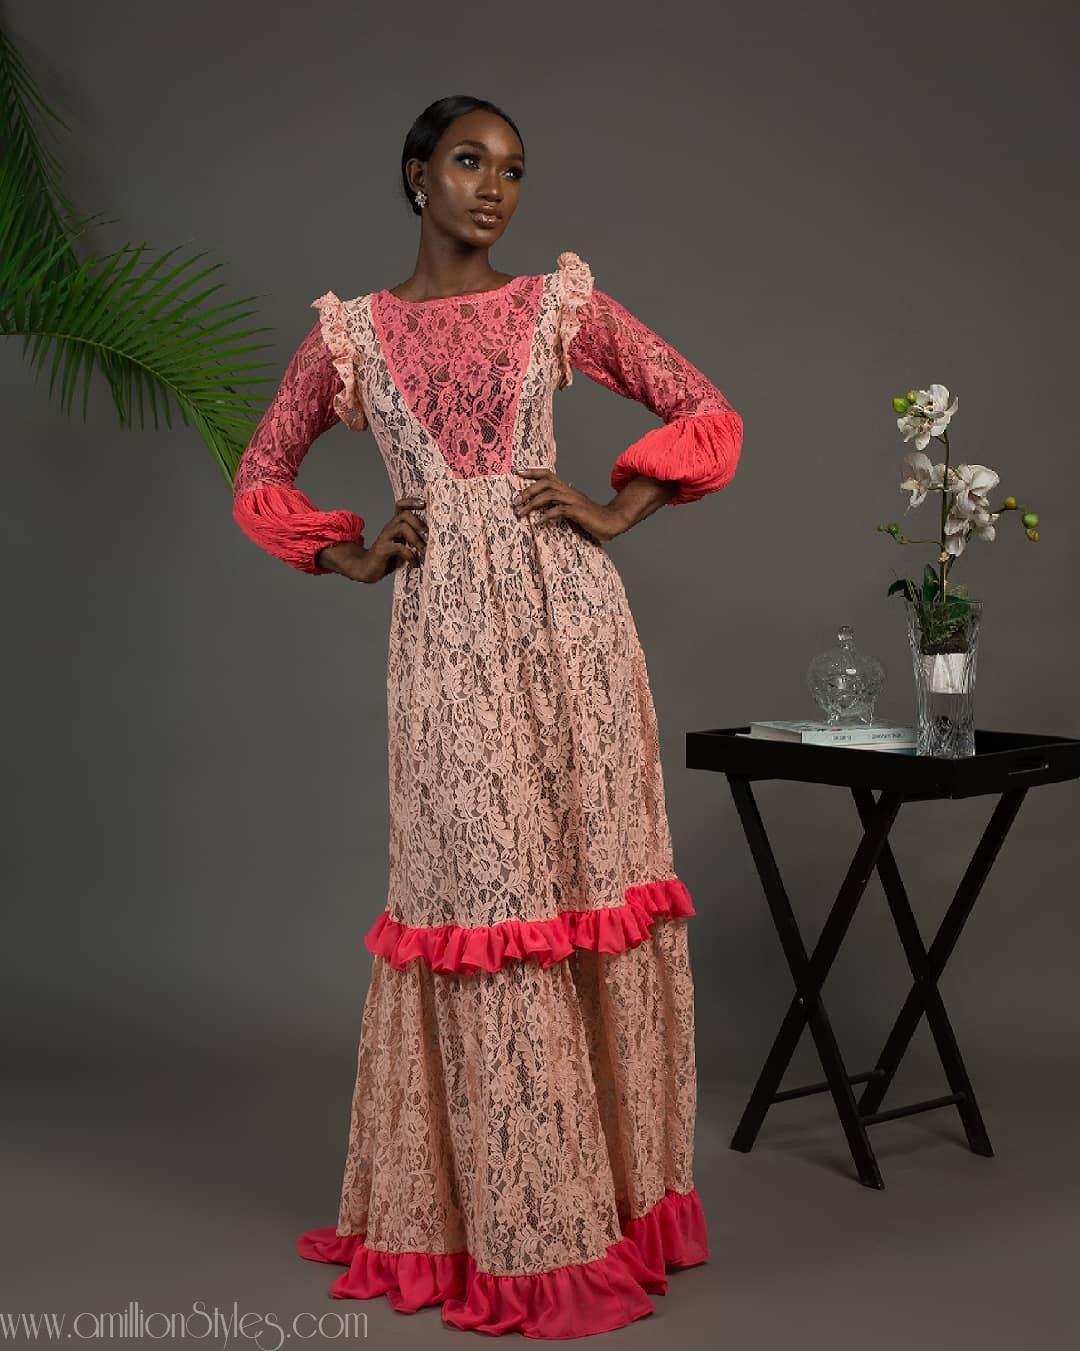 Woora Woman Unveils The 2019 Spring/Summer Collection